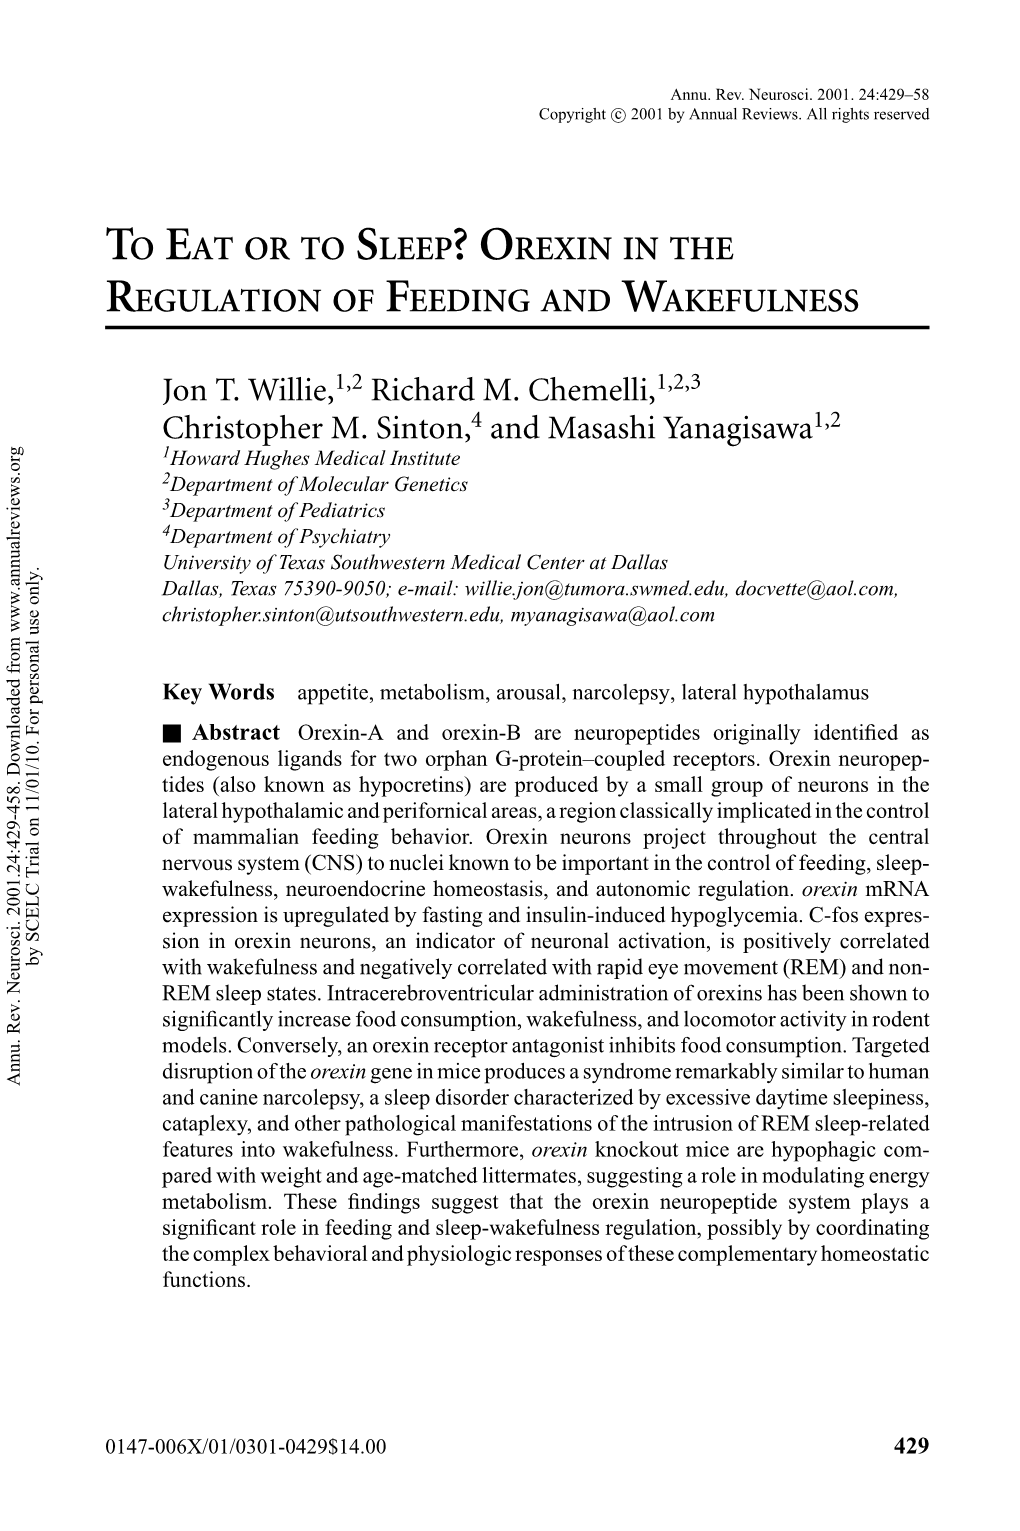 Orexin in the Regulation of Feeding and Wakefulness